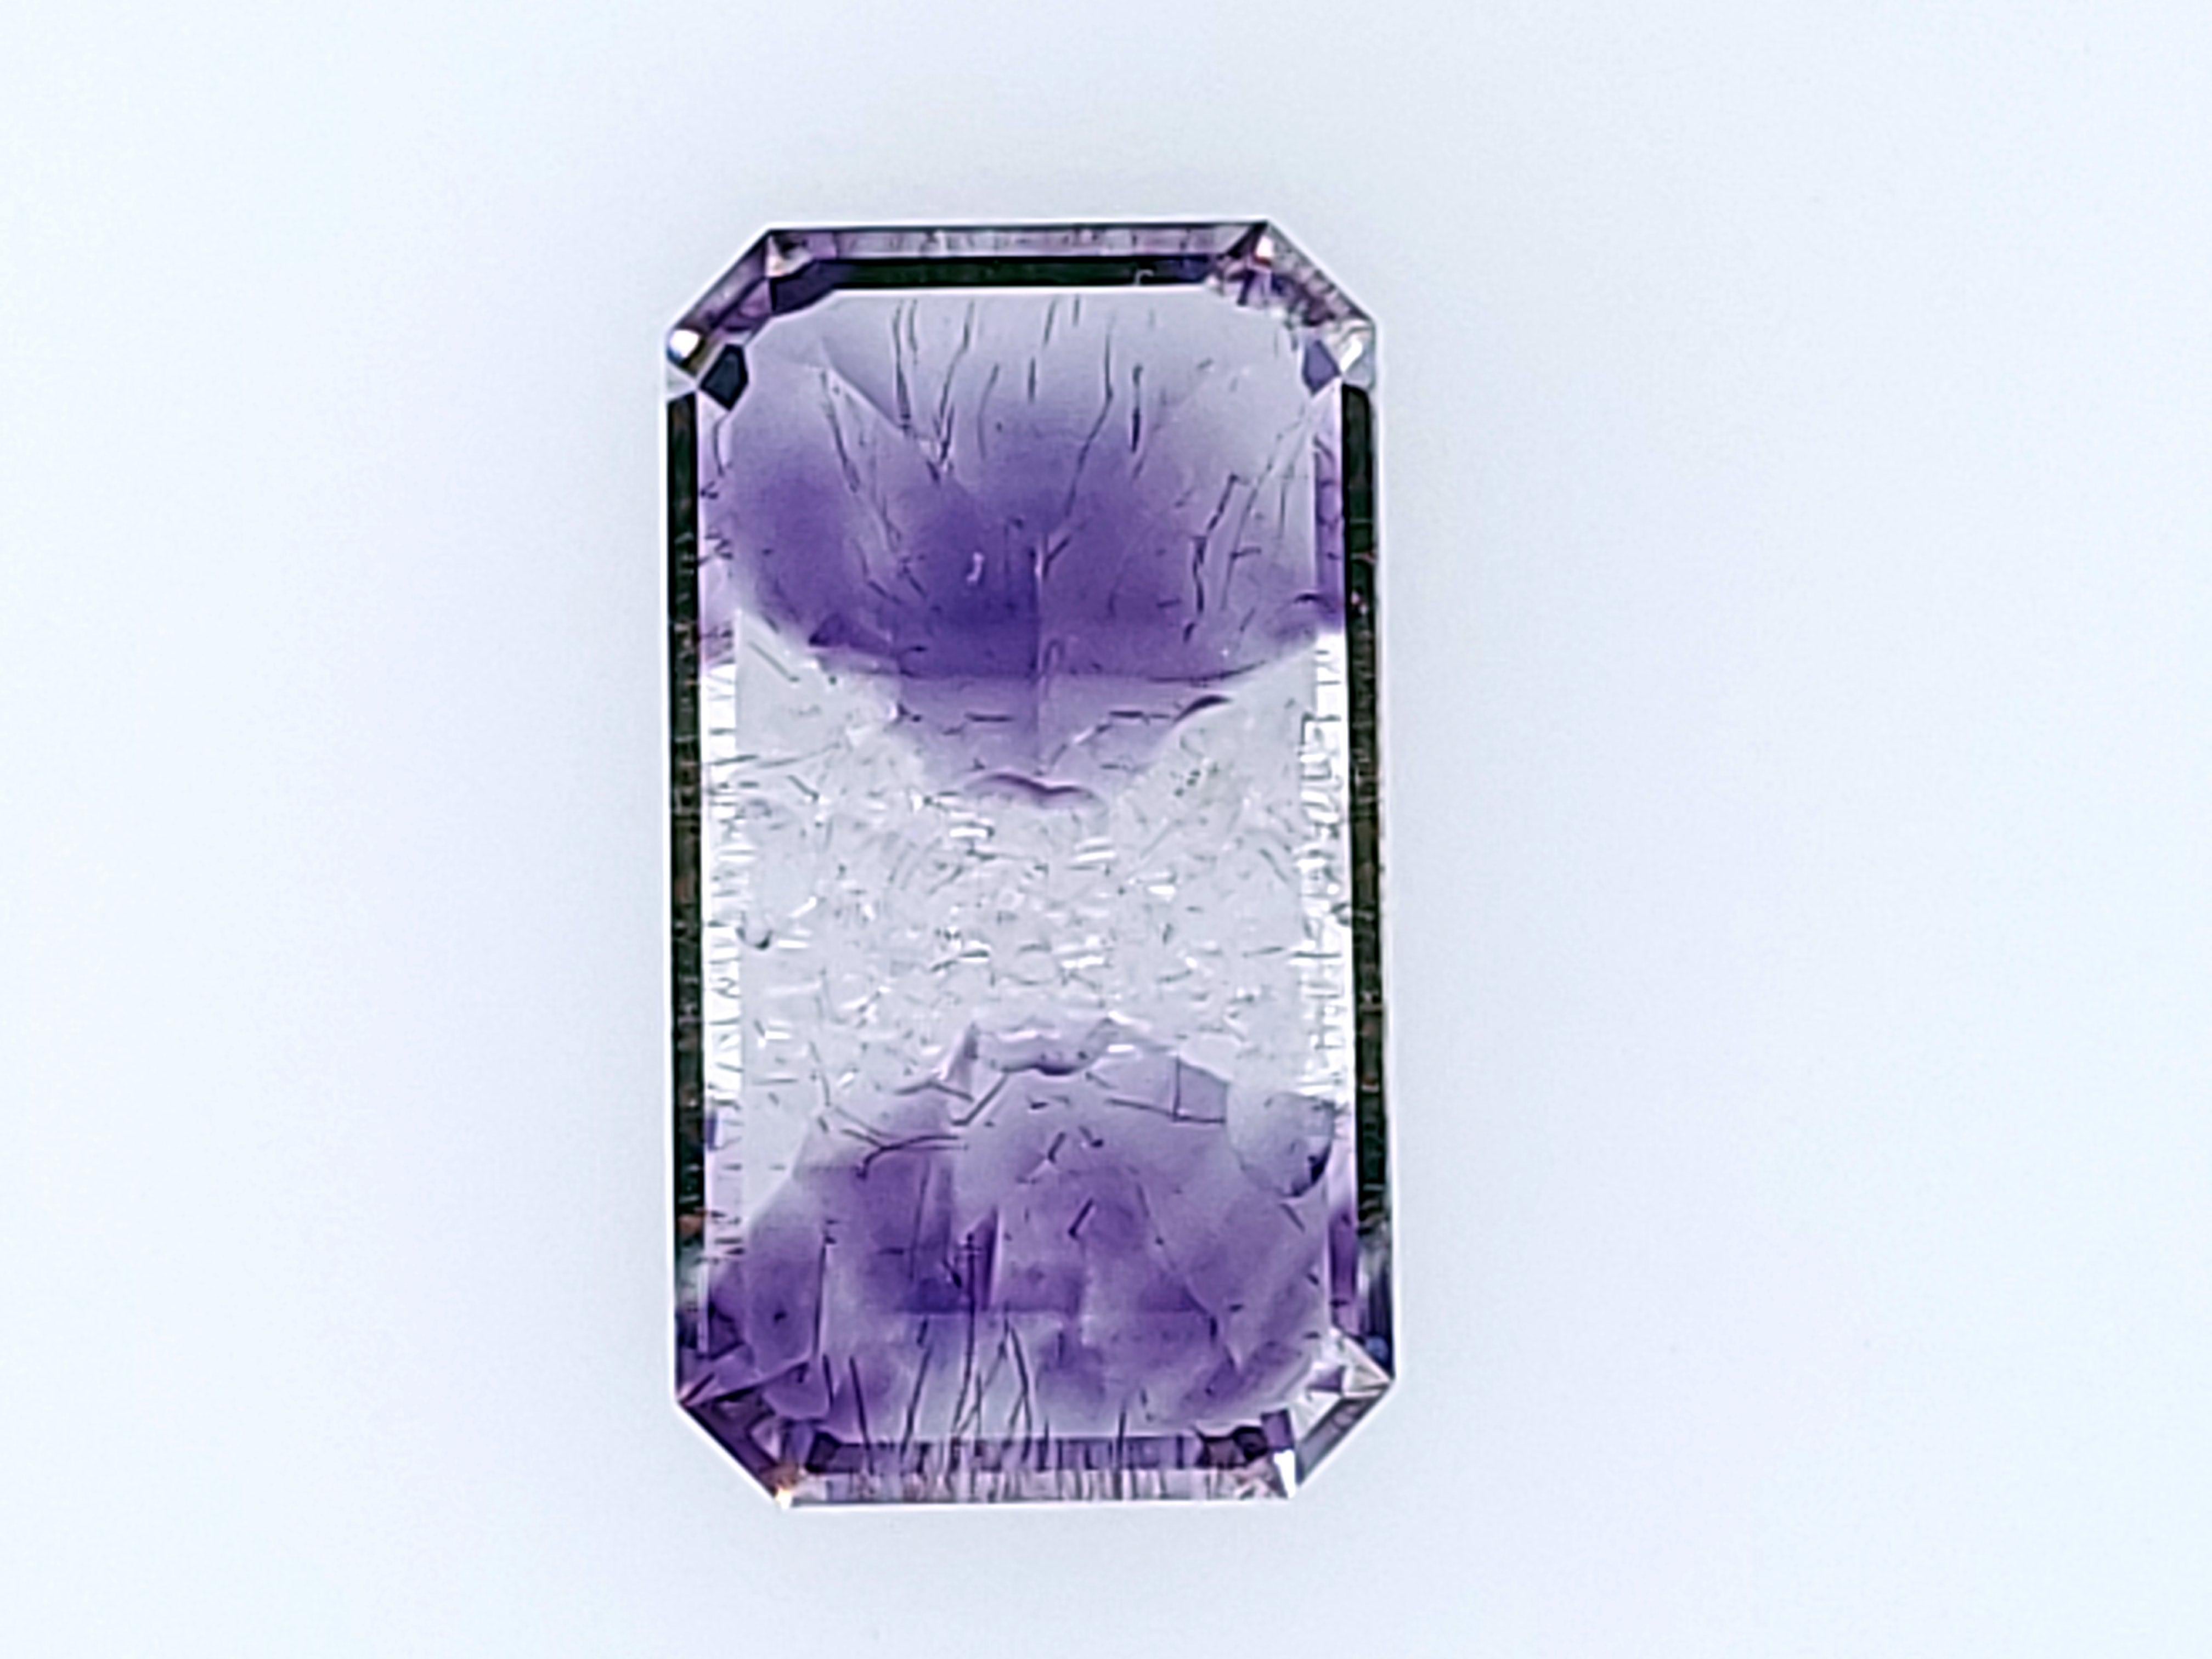 This is a rare type of Amethyst/Quartz that comes out of Morocco and a few other places of the world at times.  Some my call it Amethyst Bicolor, Amethyst Tricolor, Tricolor Quartz, Bicolor Quartz, etc.  It is essentially Amethyst whose chemical